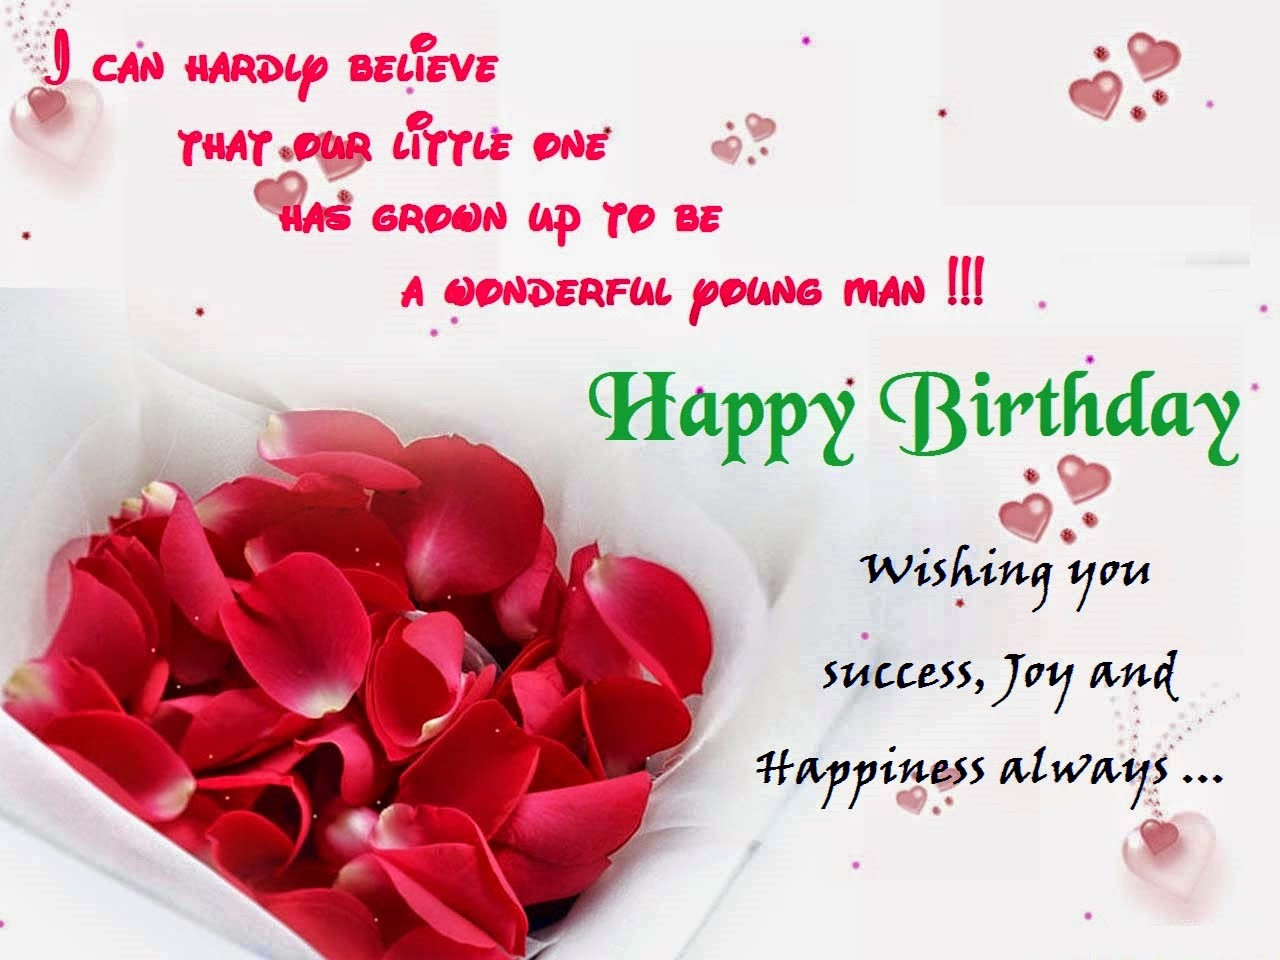 Happy Birthday Special Friend Quotes
 Friendship Quotes For Someone Special QuotesGram